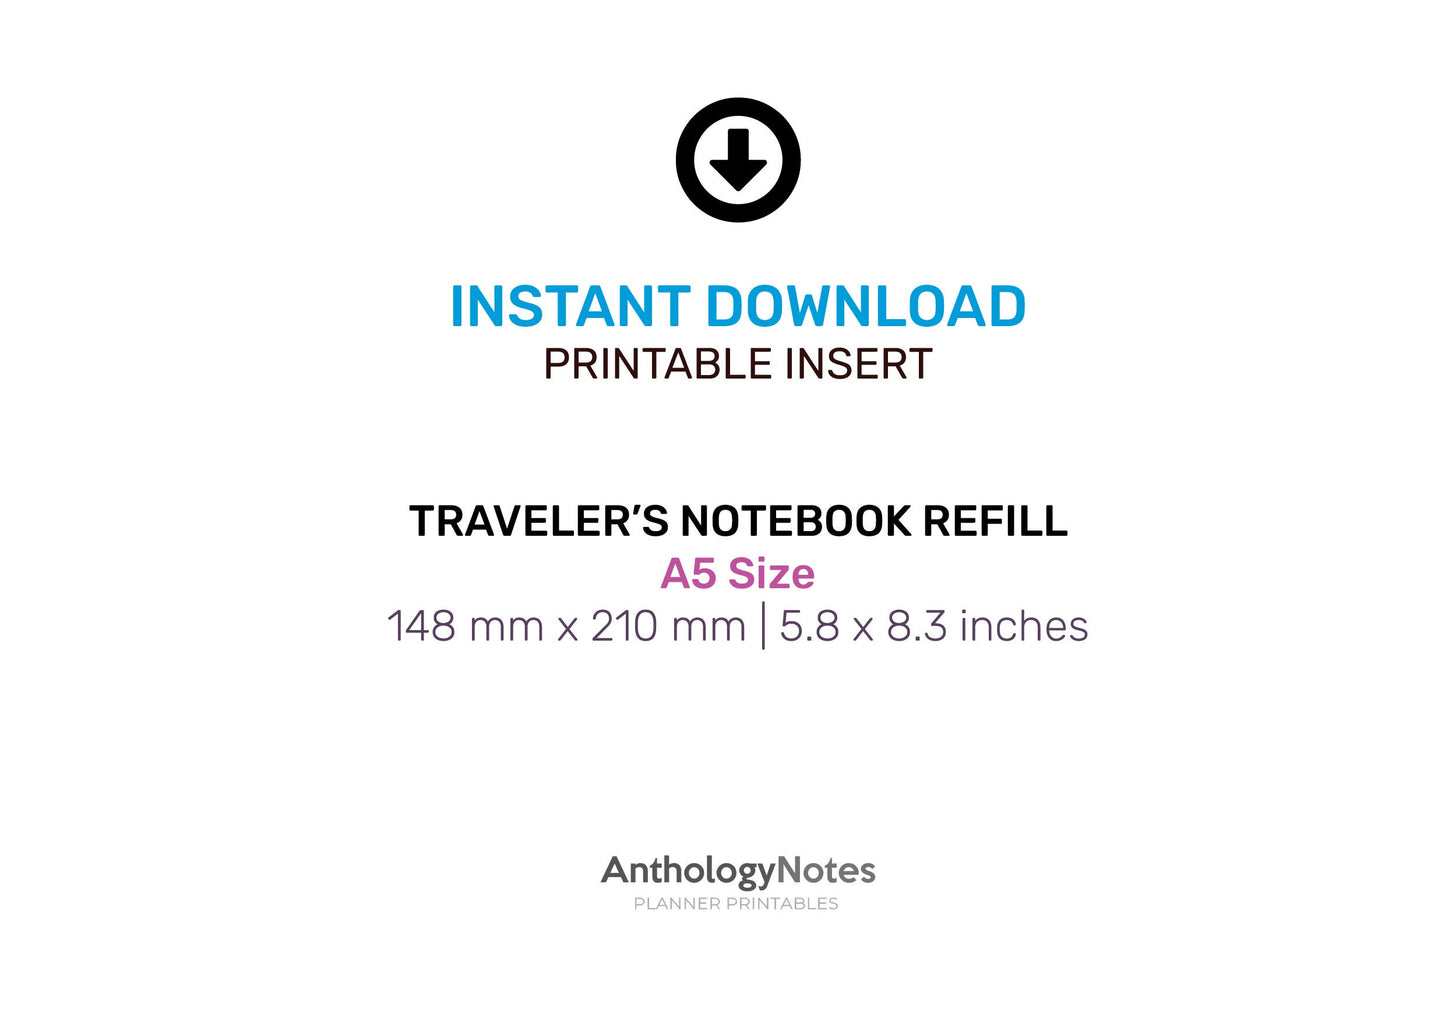 A5 TN All-in-One Monthly, Weekly Vertical, Tracker & TO DO List, Grid Notes Printable Travel A522-005er's Notebook Insert